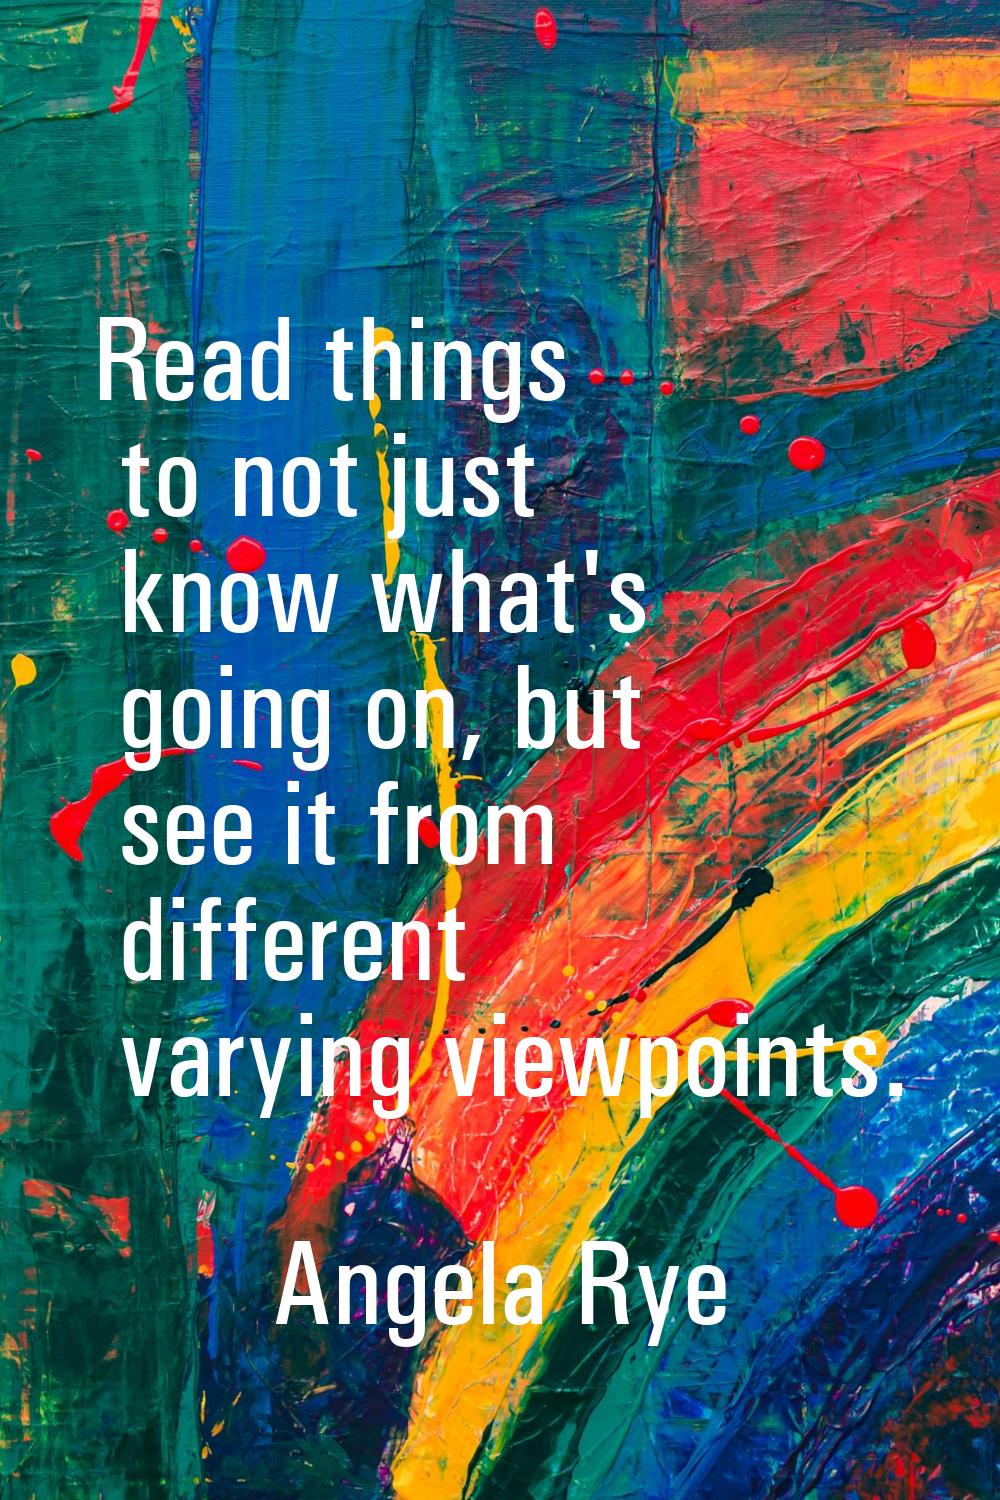 Read things to not just know what's going on, but see it from different varying viewpoints.